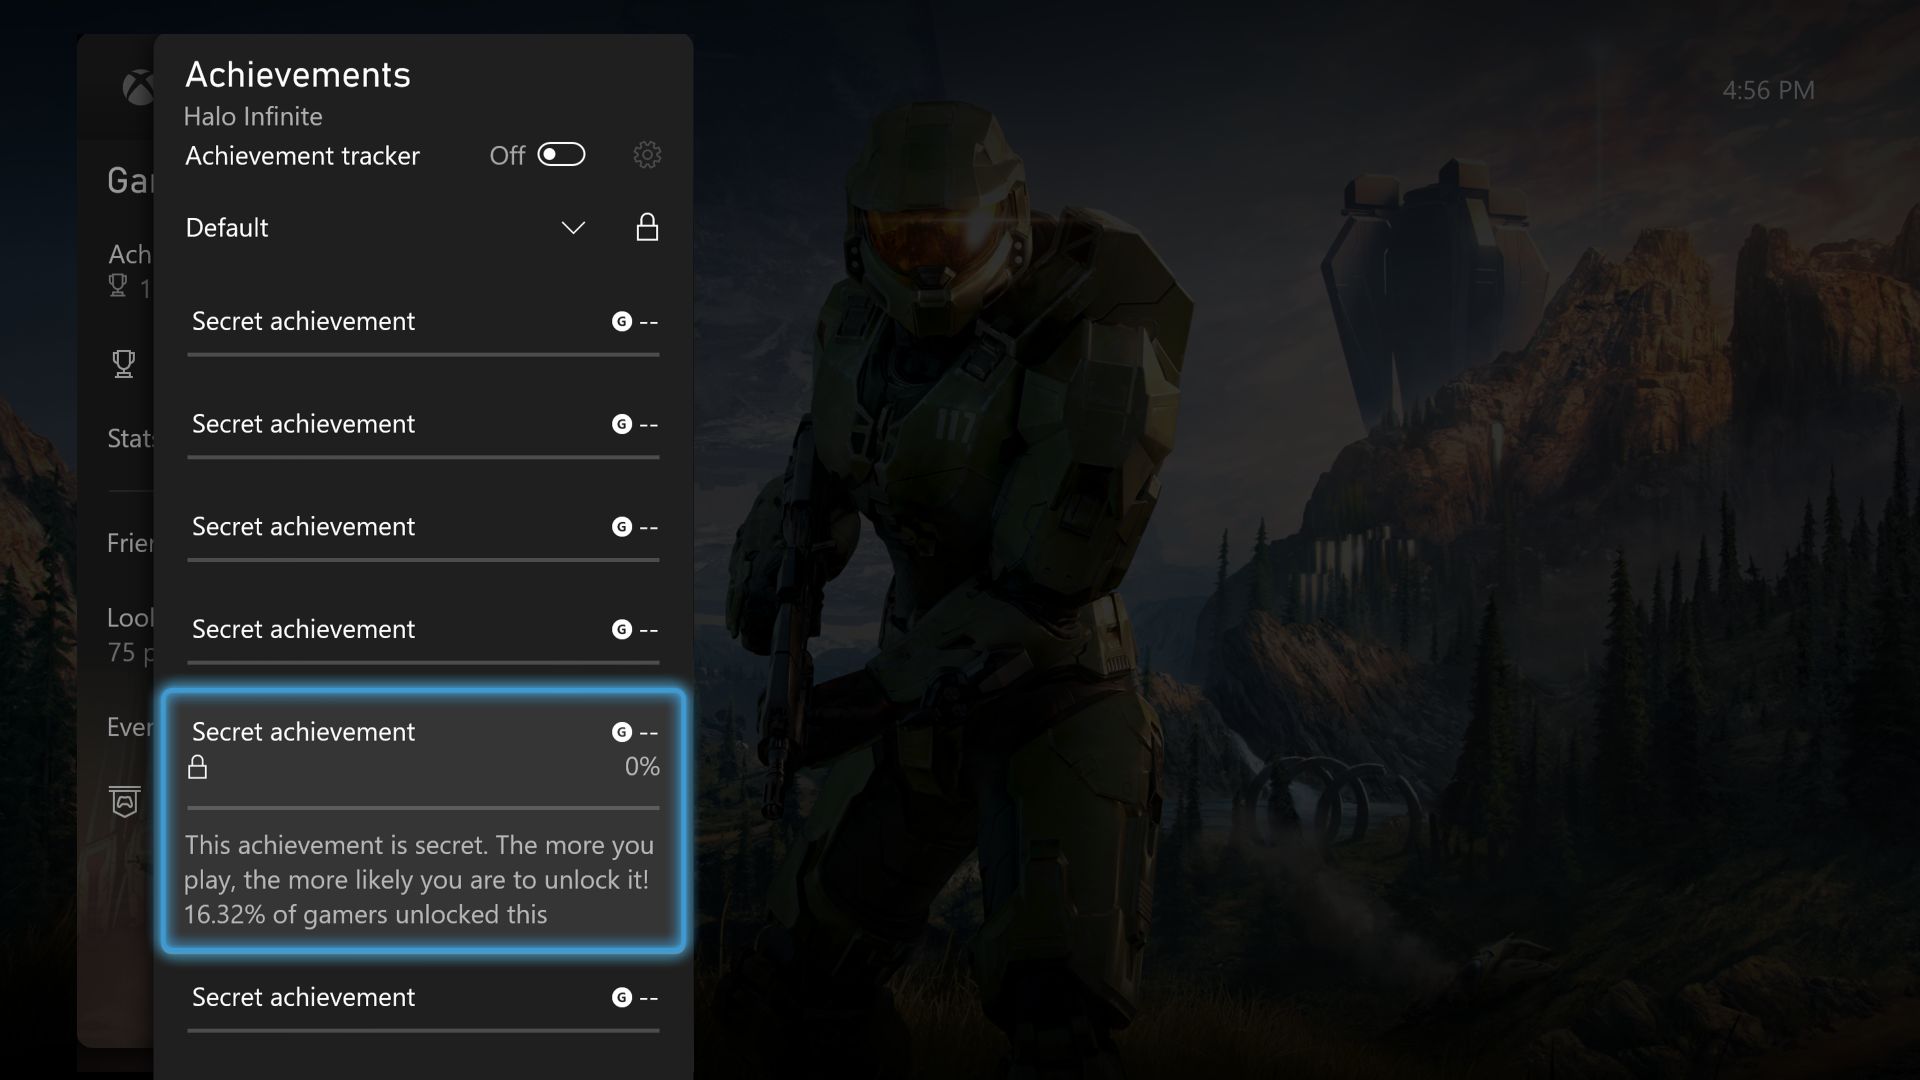 June Xbox Update Reveal Secret Achievements Anywhere You Play on Xbox